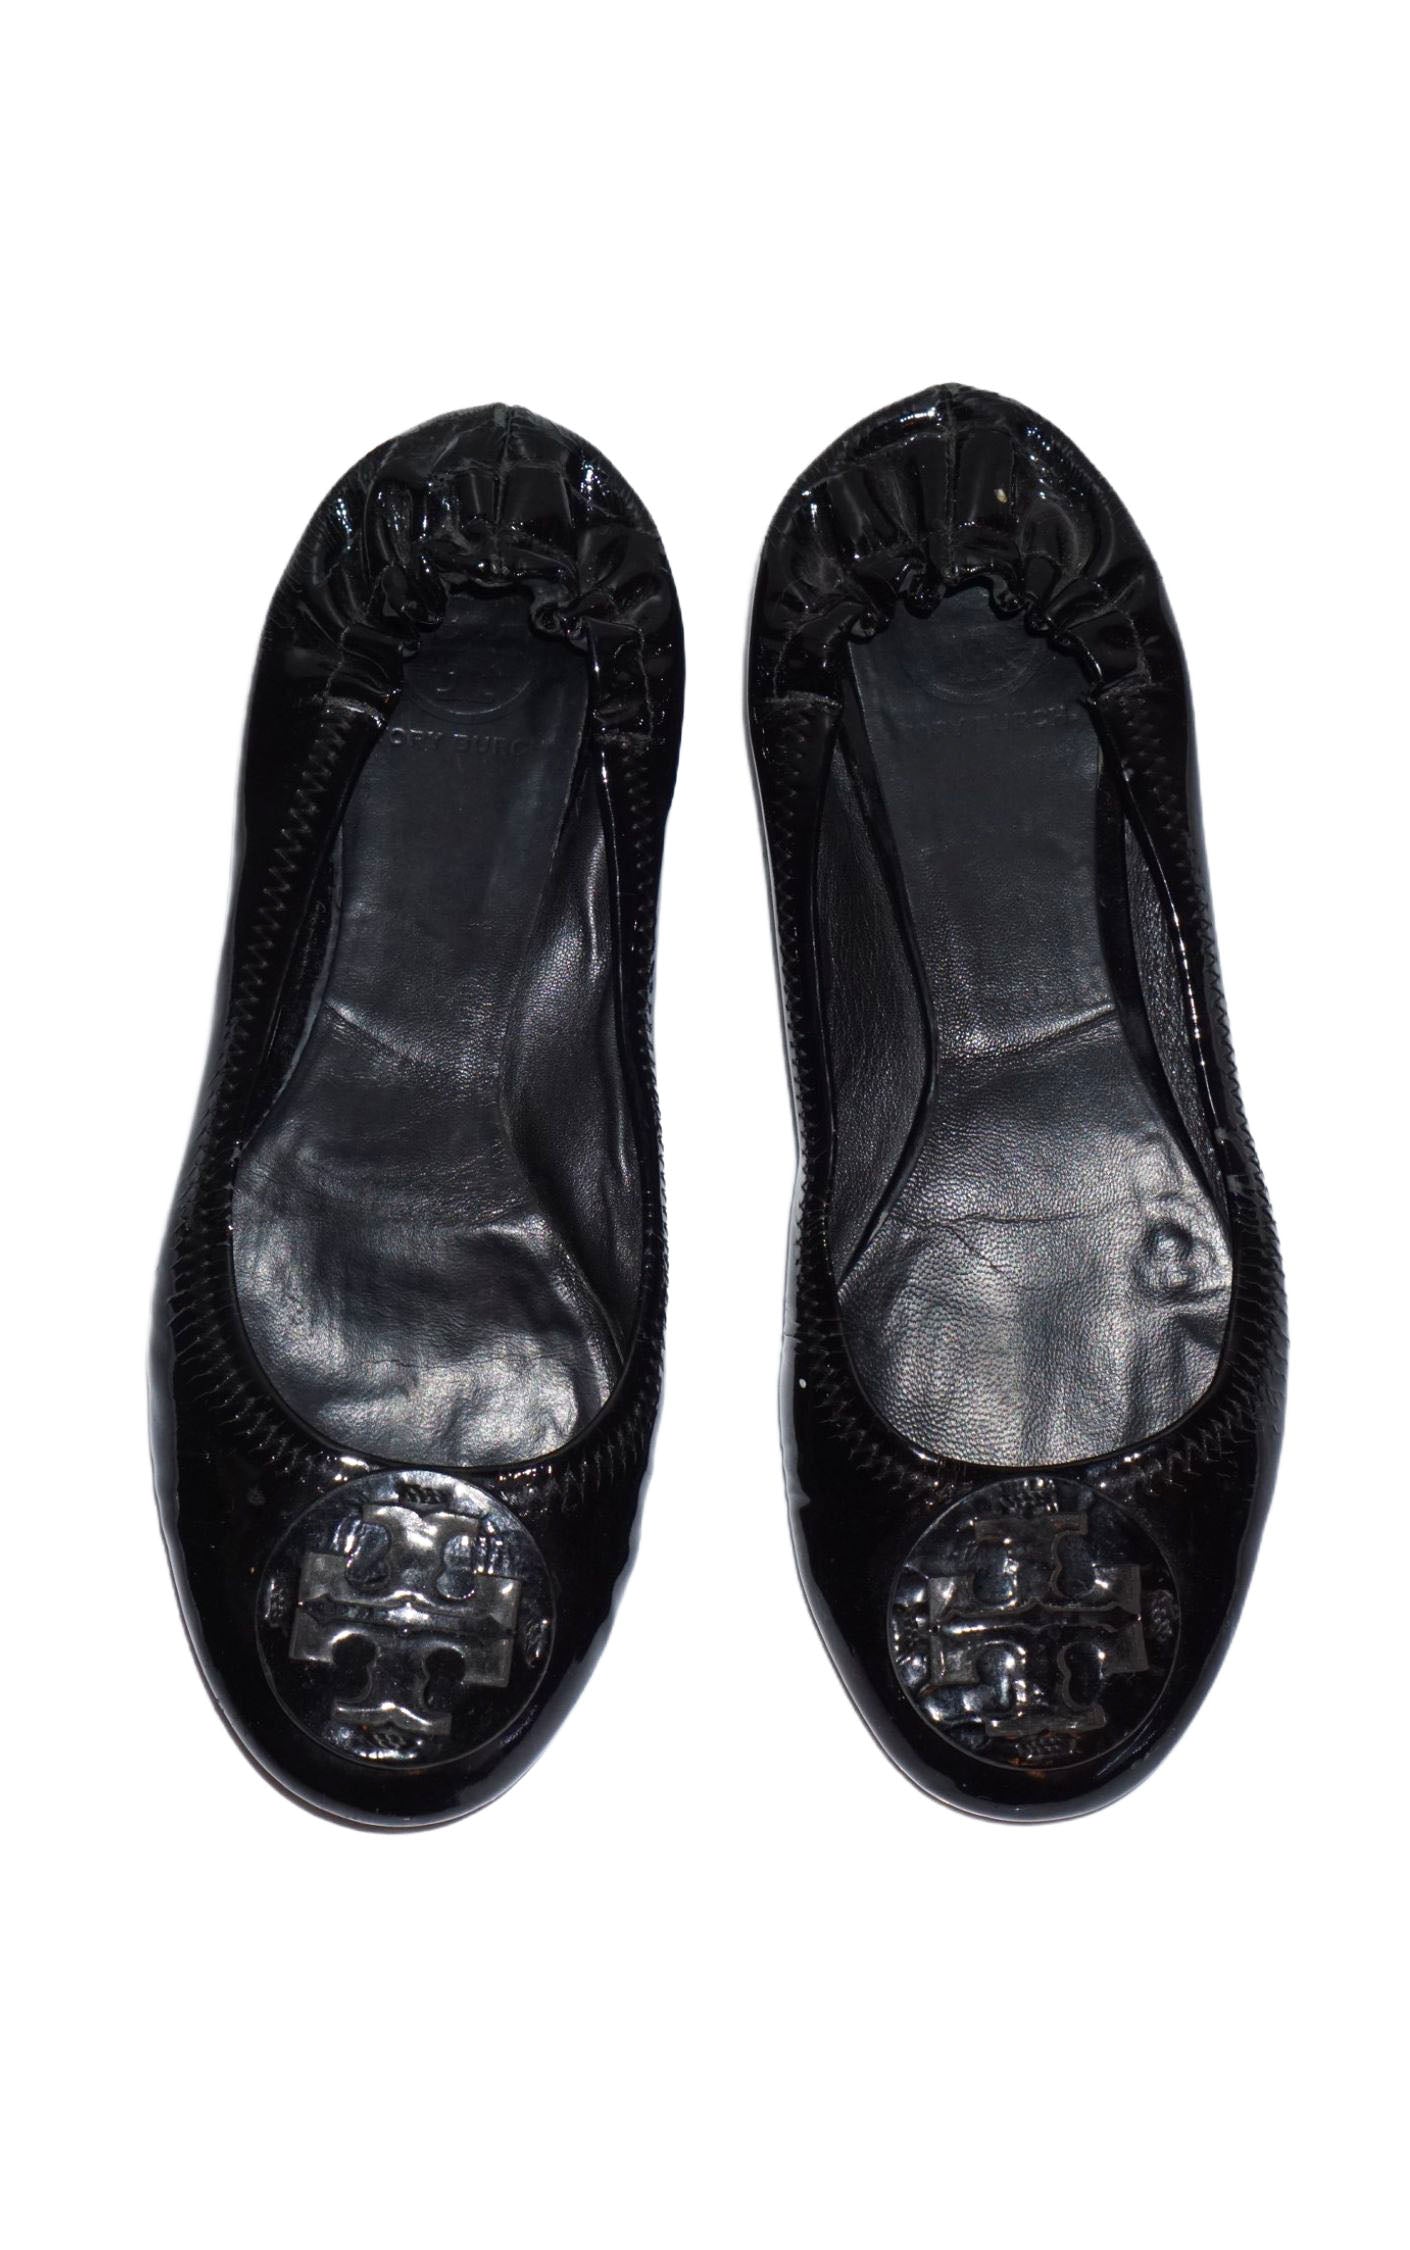 TORY BURCH Minnie Travel Black Patent Leather Ballet Flat Shoes resellum